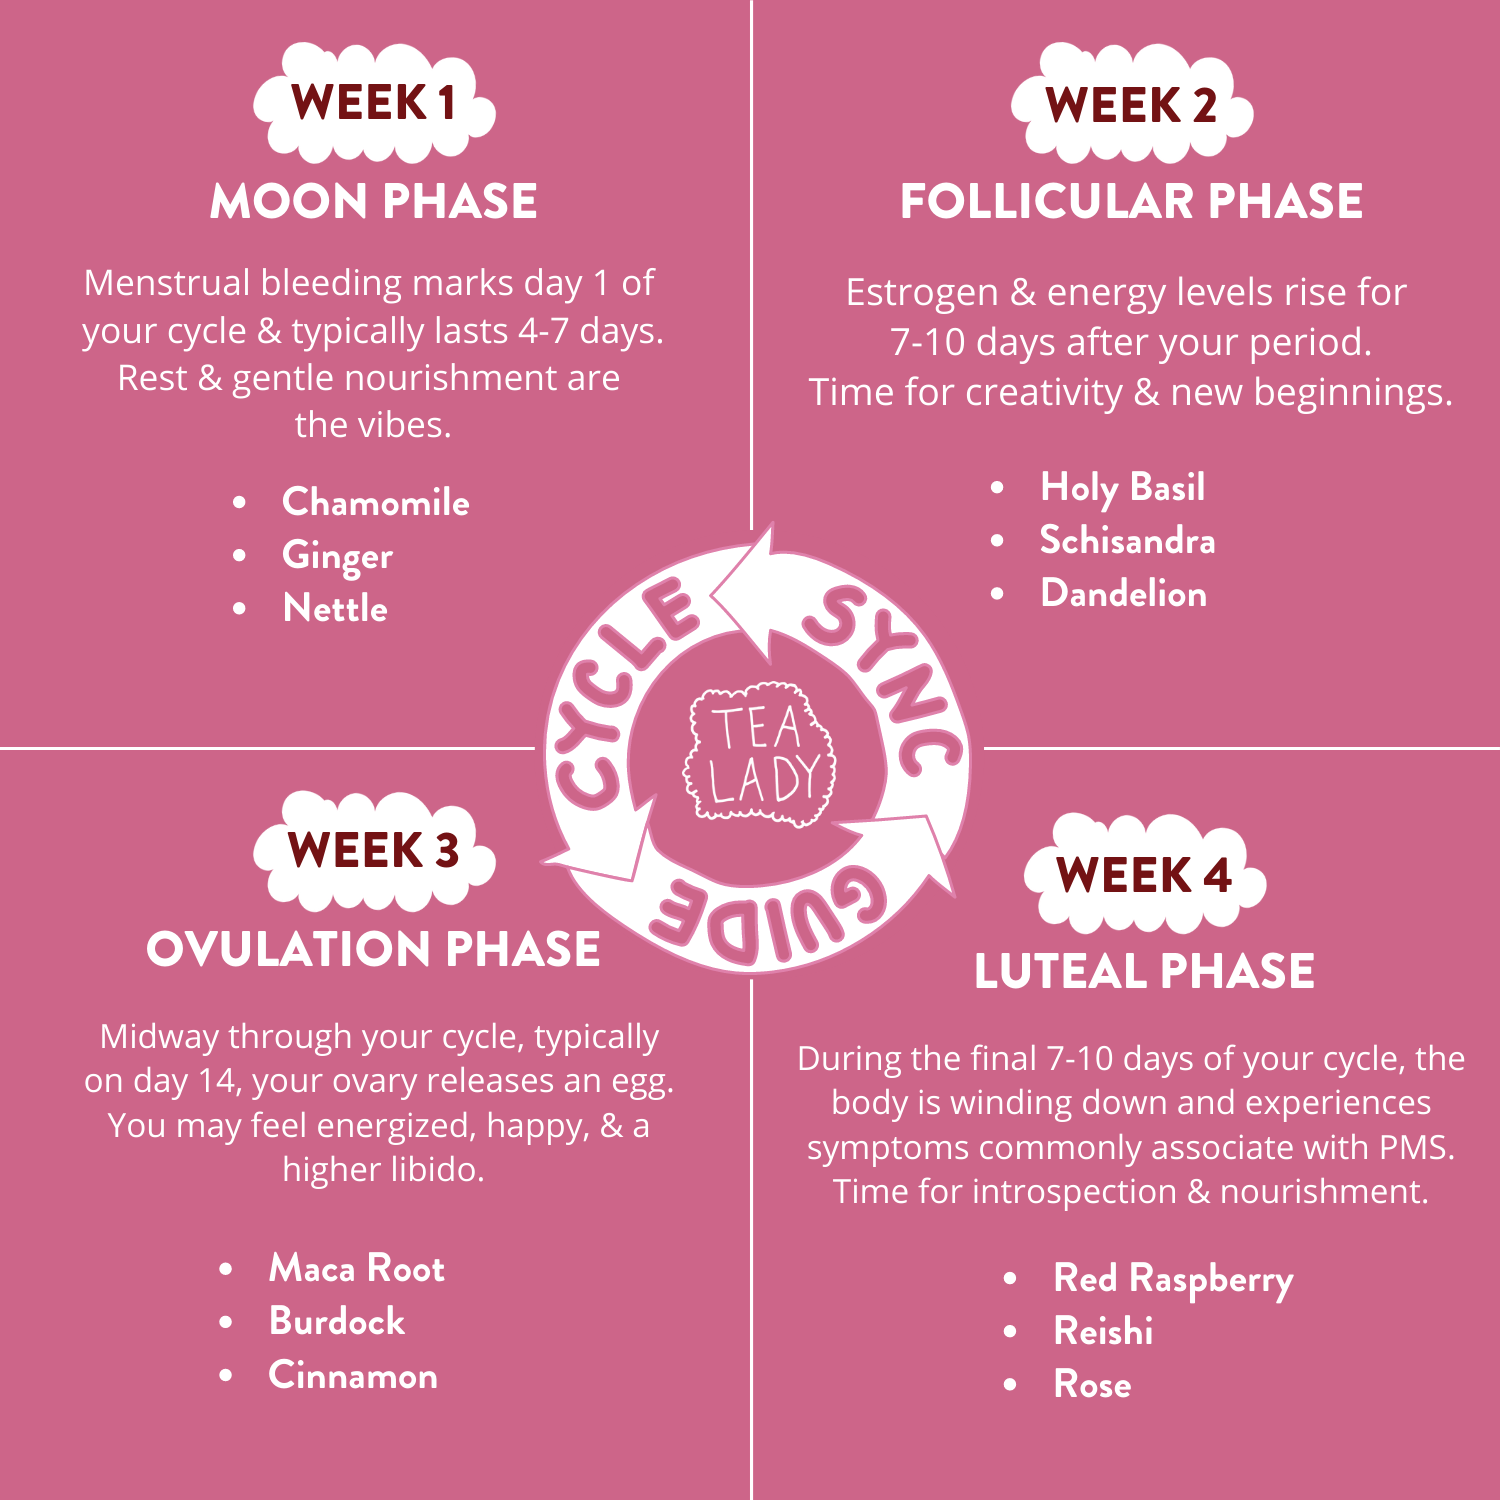 info graphic of a cycle syncing guide explaining each week of the menstral phases and the herbs that help during those phases